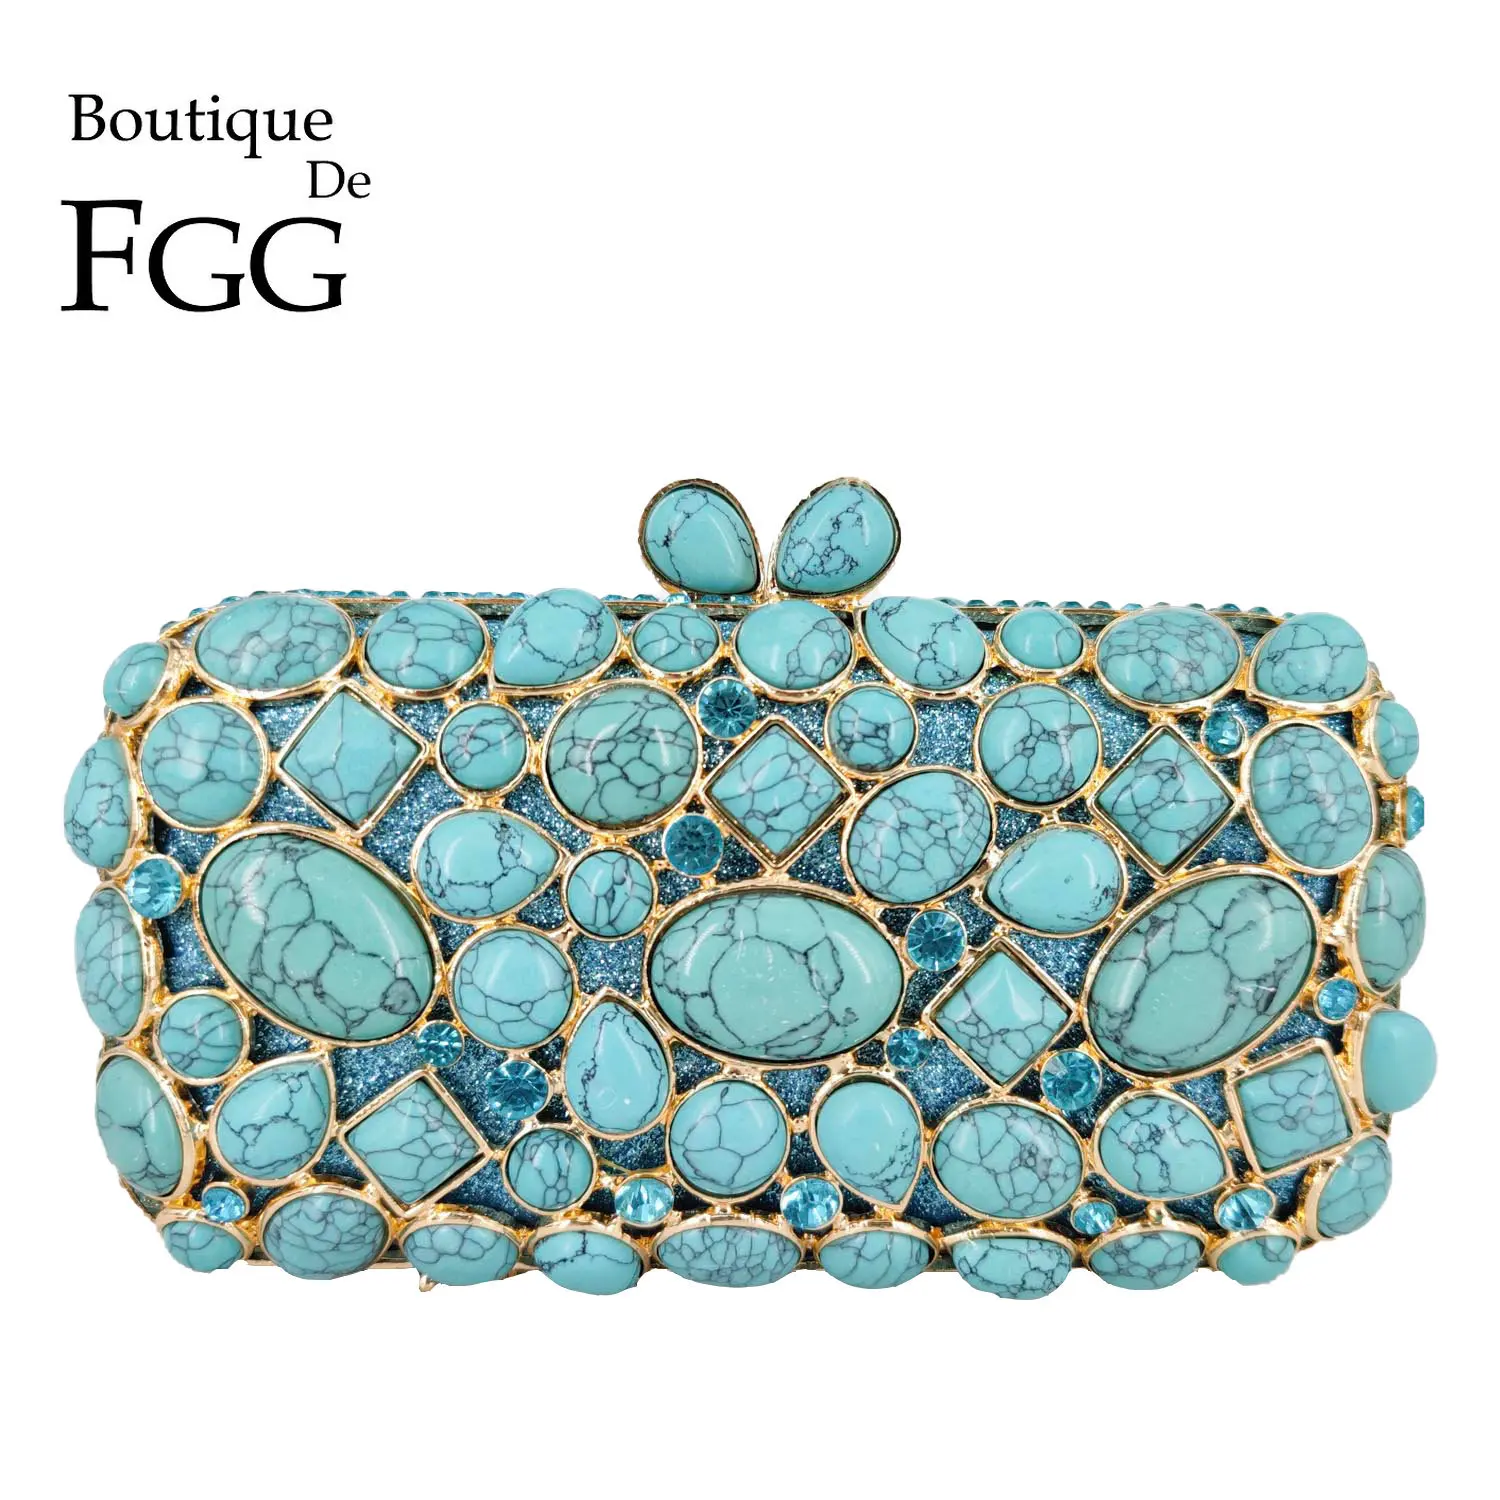 Boutique De FGG Turquoise Synthetic Agate Stone Evening Bags and Clutches for Women Formal Party Bags Party Rhinestone Handbags